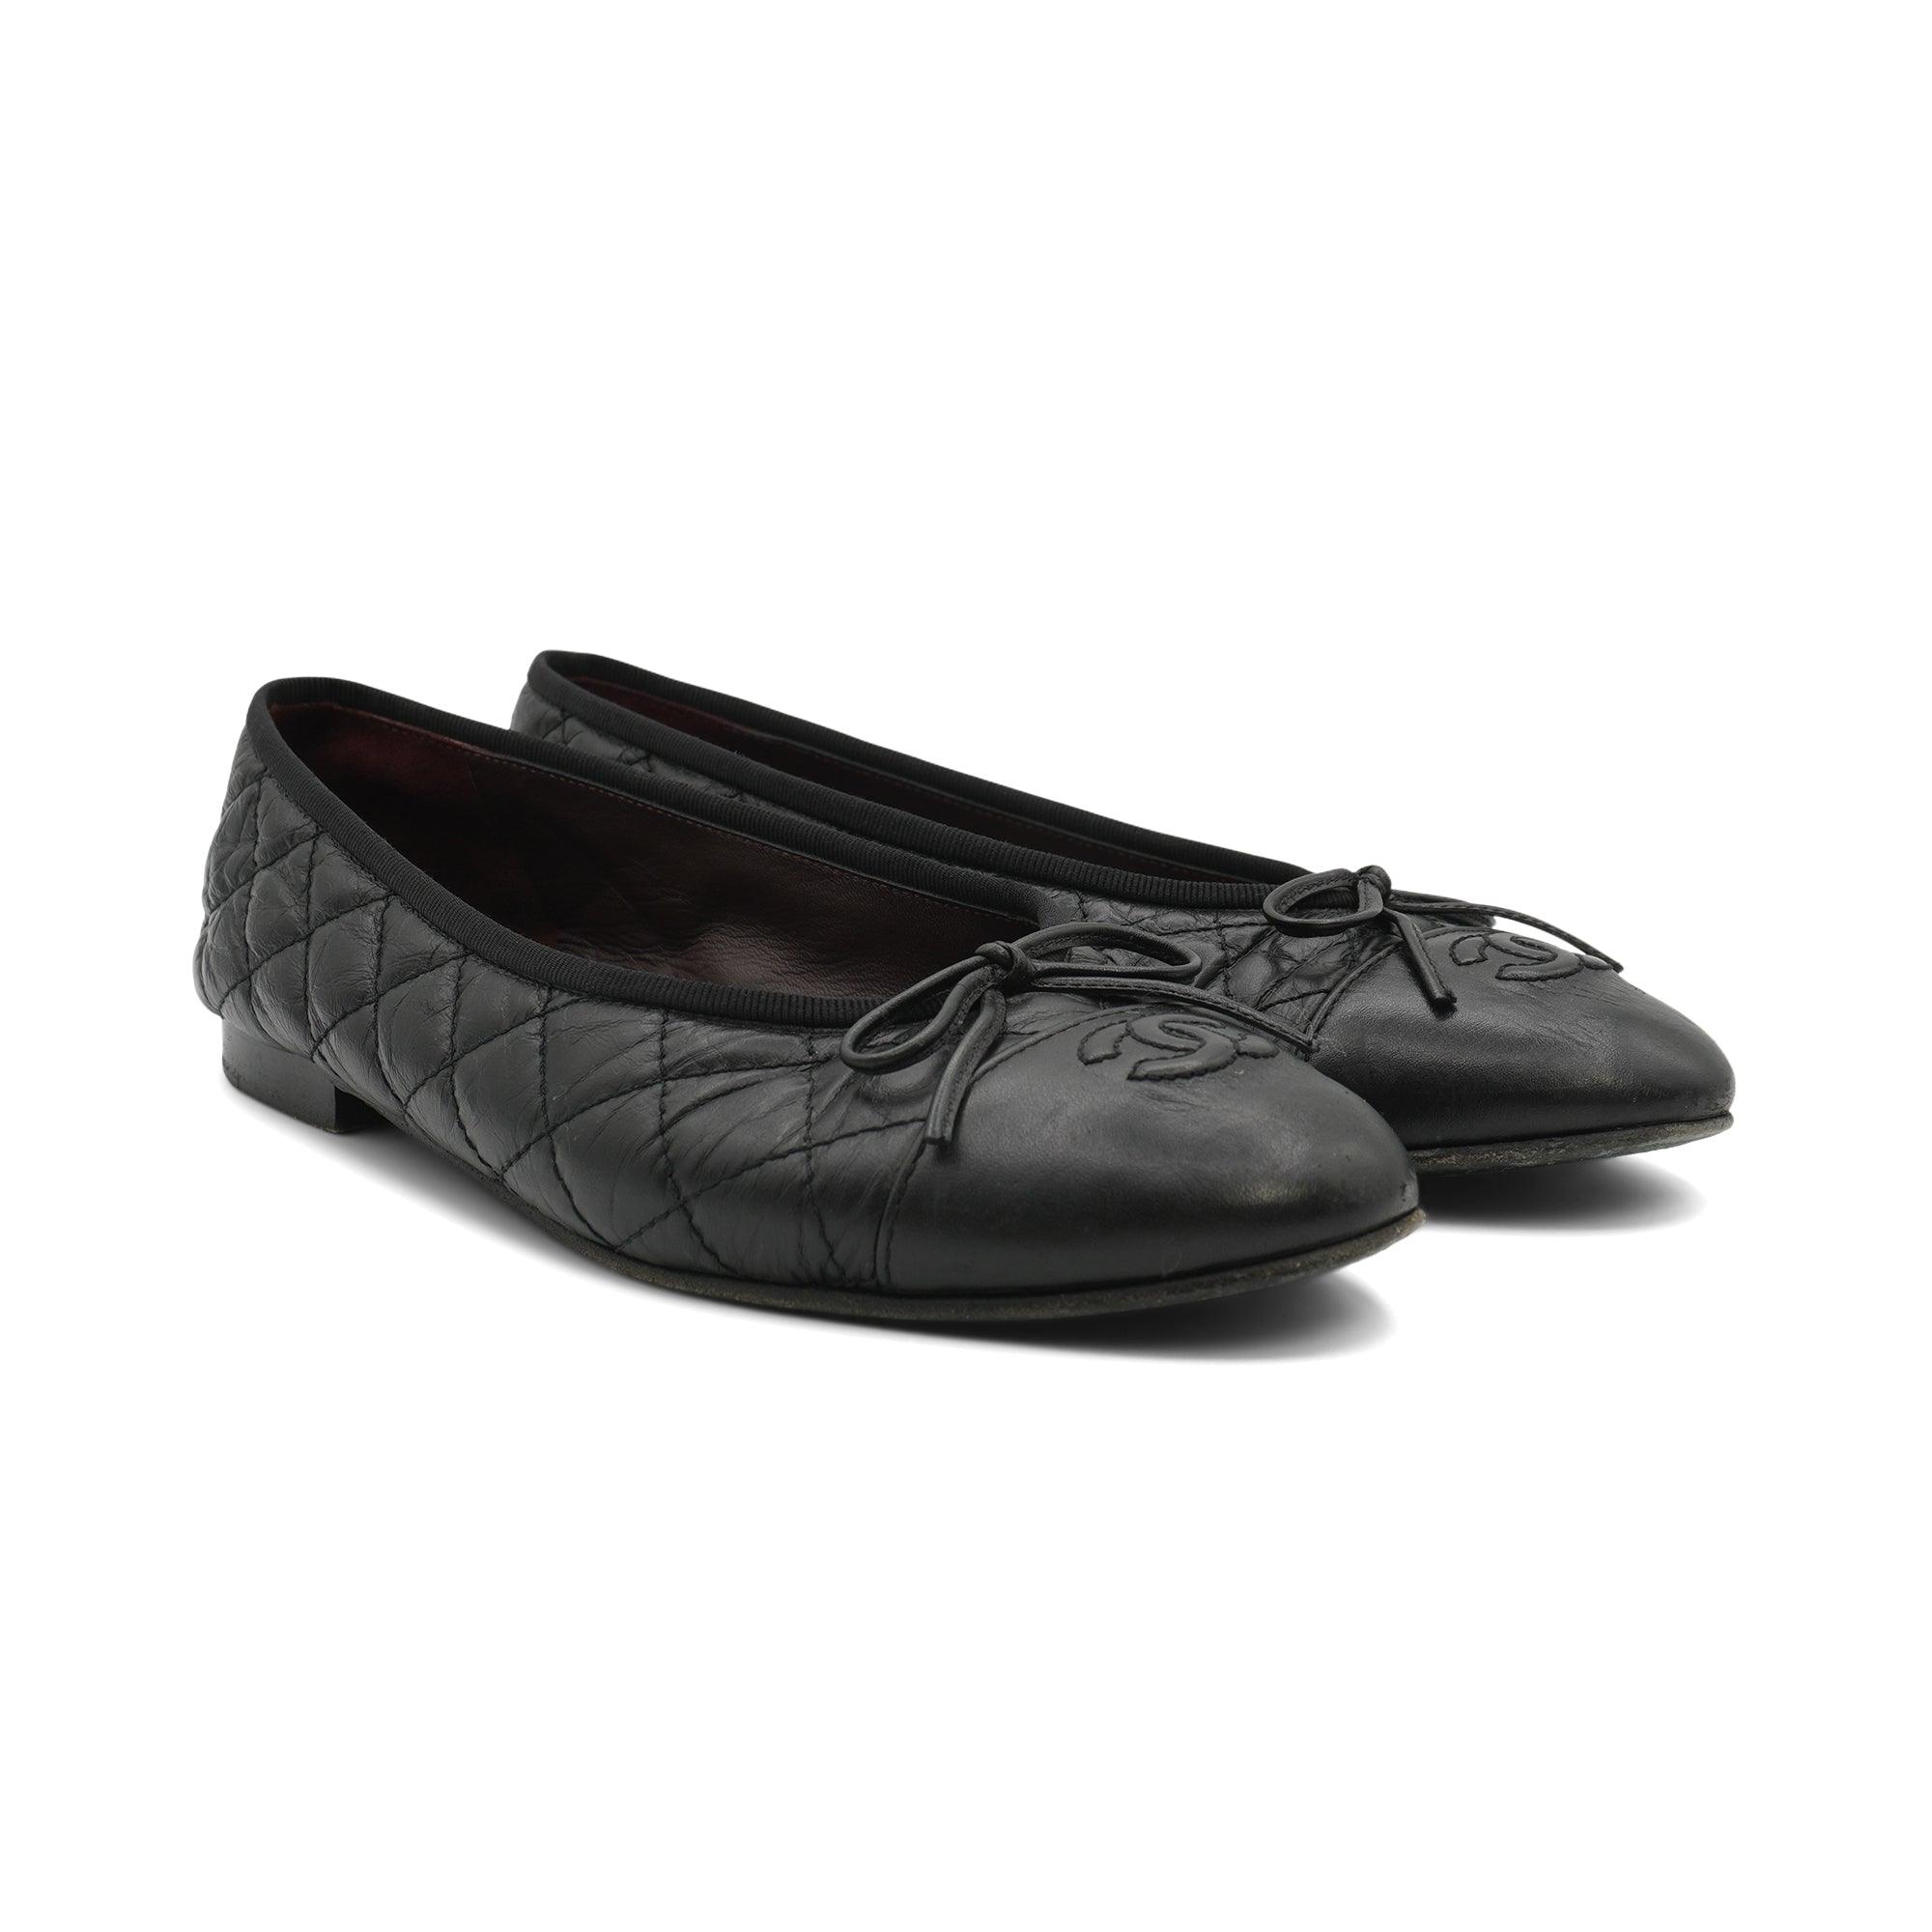 Chanel Ballet Flats - Women's 38.5 - Fashionably Yours